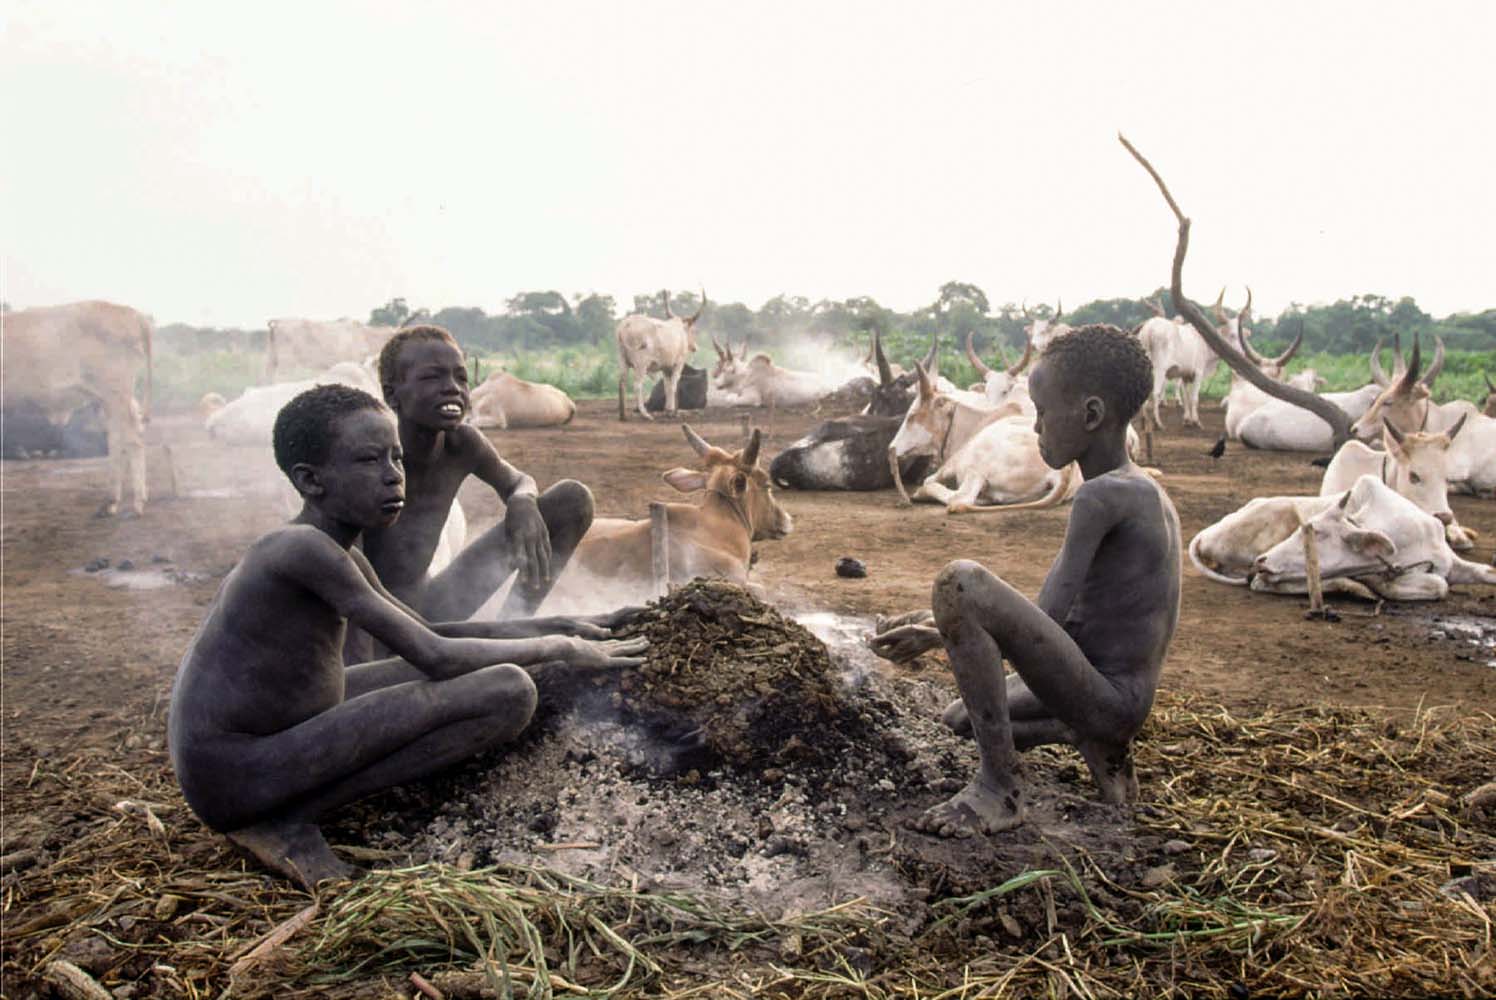 Naked Dinka boys burn dried cow dung to keep mosquitoes off the nearby cows in a cattle camp near Thiet, Sudan July 12, 1996. Their elders fear that because of the destruction caused by southen Sudan's 13-year-old civil war, this generation may lose the Dinkas' culture of catle that has survived thousands of years of drought, disease and famine. (AP Photo/Jean-Marc Bouju)